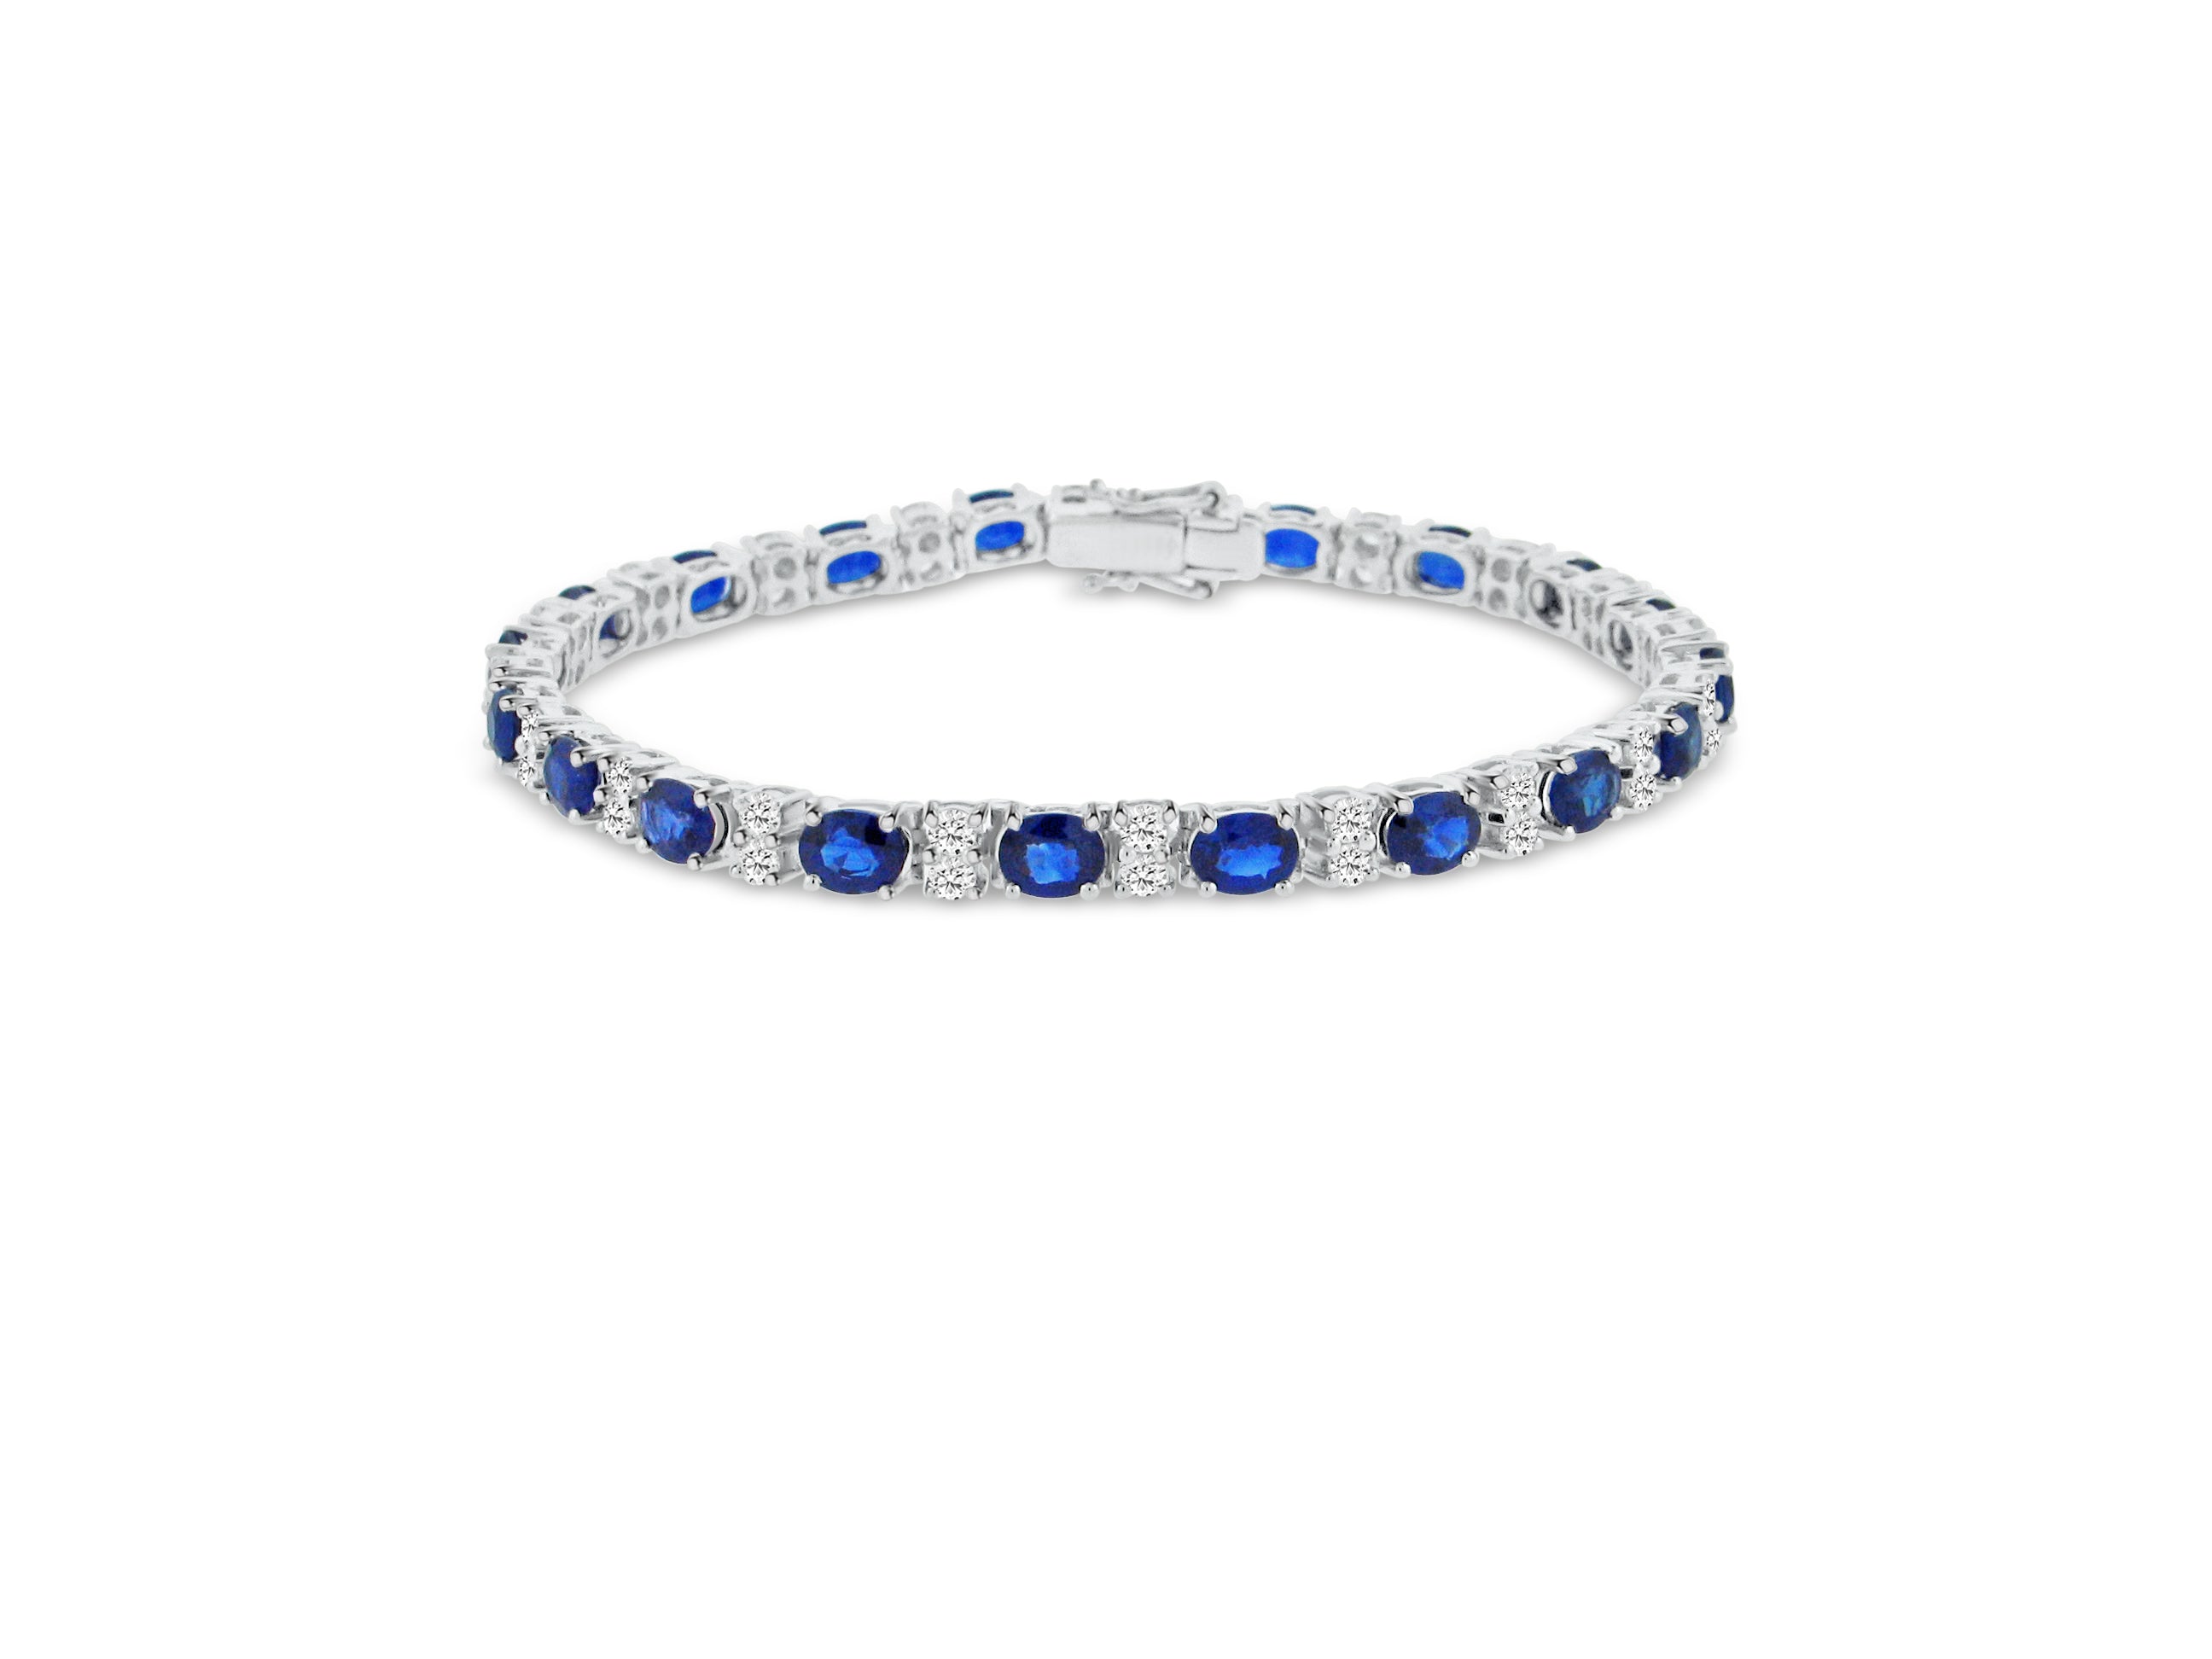 MULLOYS PRIVE'18K WHITE GOLD 9.05CT A+ SAPPHIRES 1.76CT VS-SI CLARITY G COLOR CLASSIC BRACELET